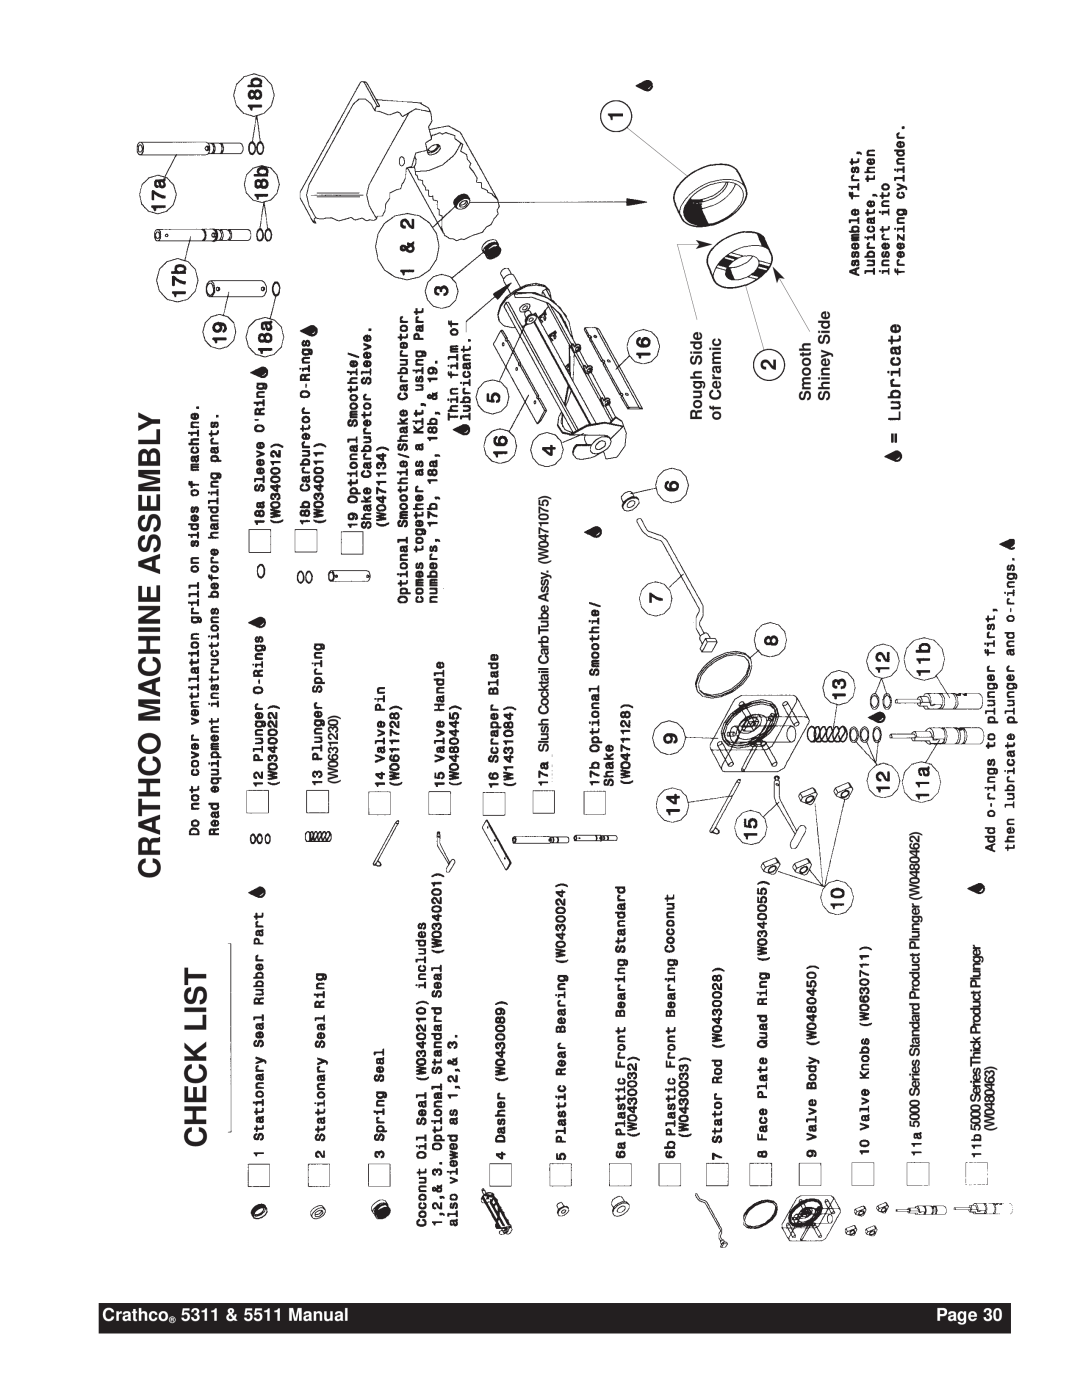 Grindmaster Crathco 5311 & 5511 Manual Page, Crathco Machine Assembly Check List, SeriesThick Product Plunger W0480463 